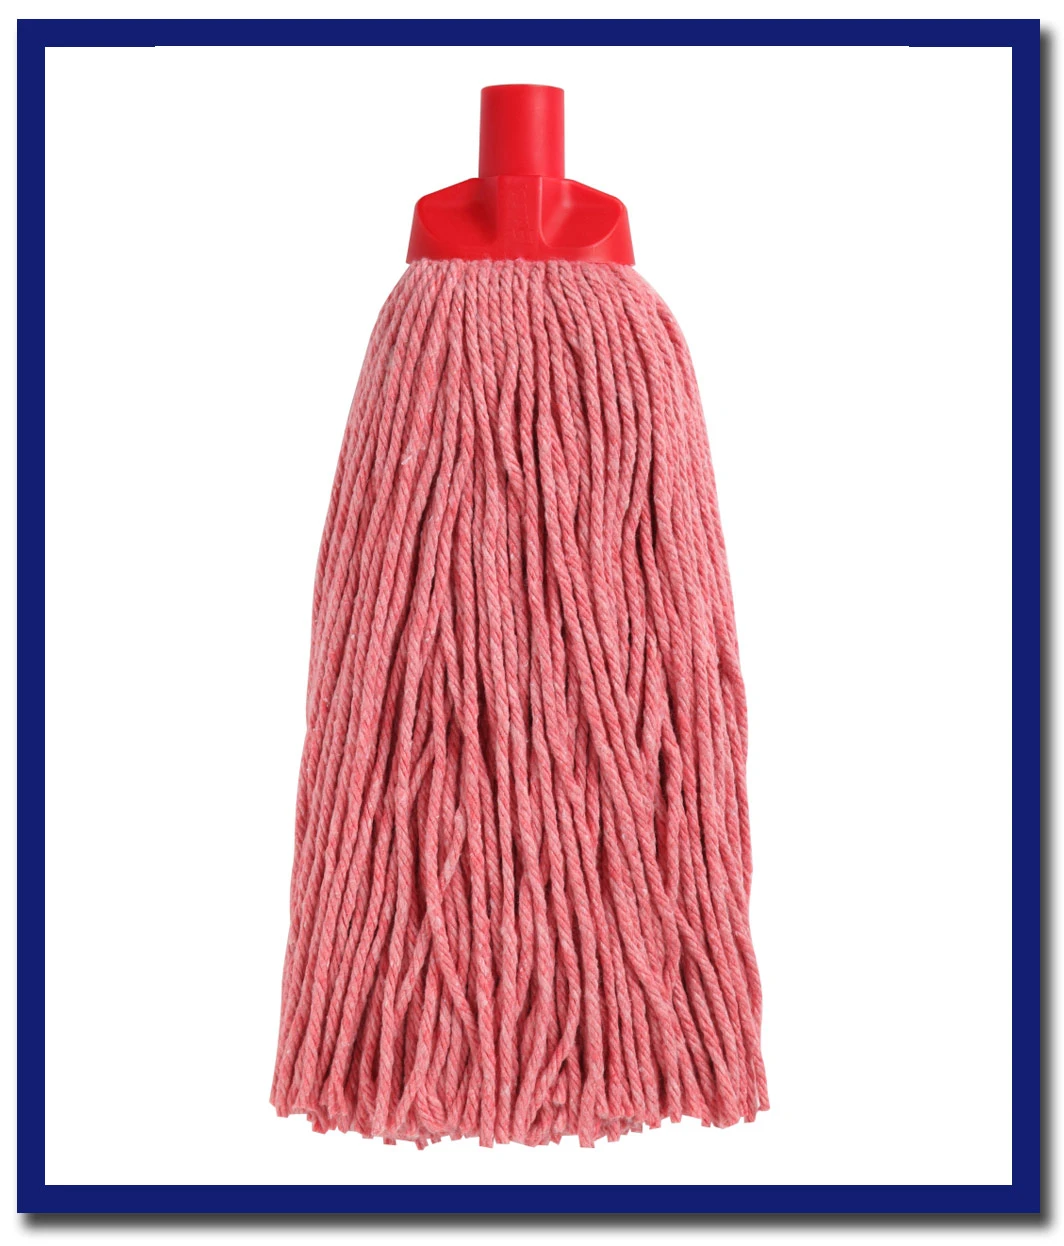 Edco Enduro Mop - 1 Pc - Stone Doctor Australia - Cleaning Accessories > Tools > Cotton Mops